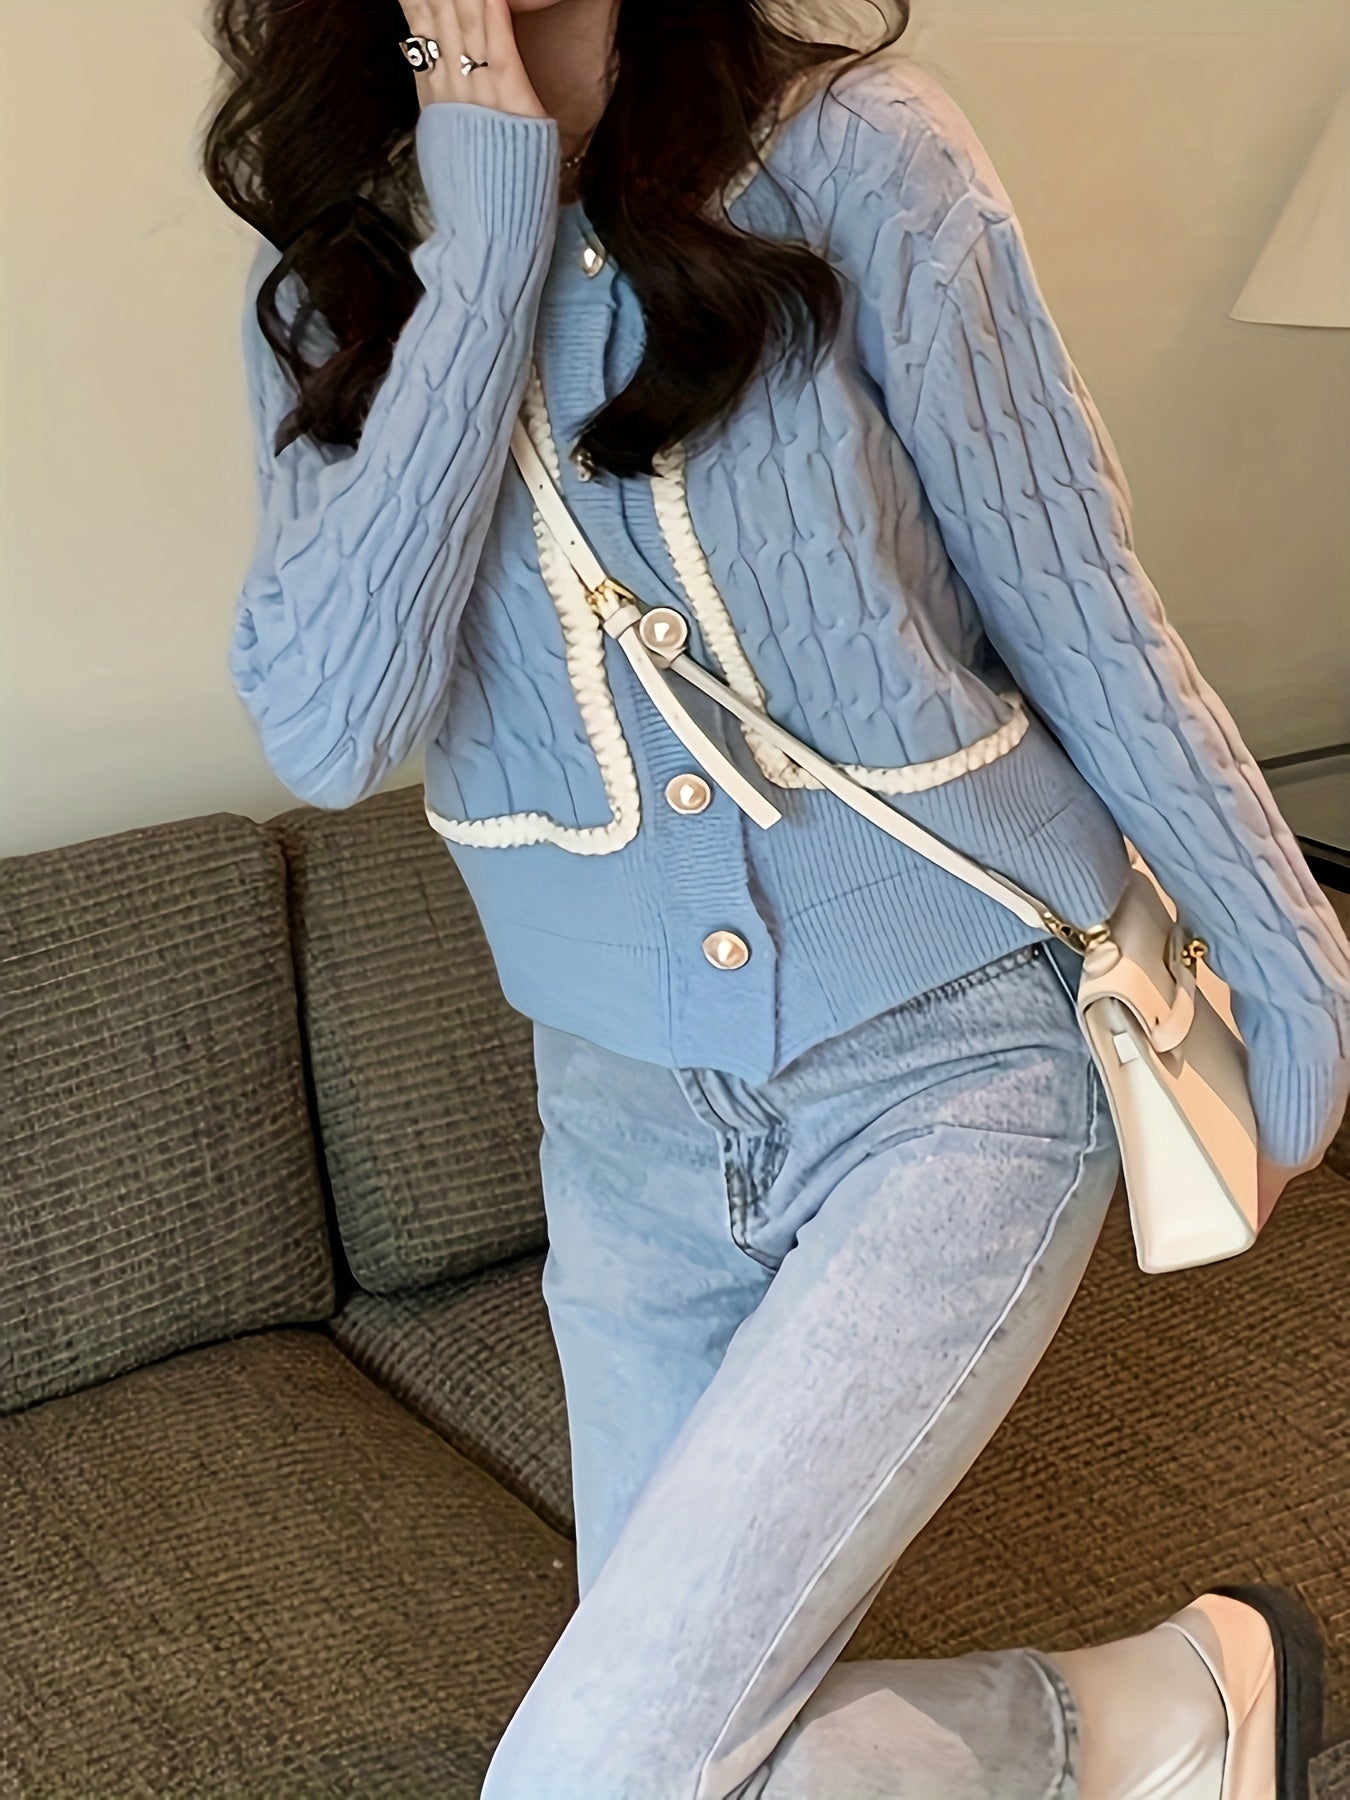 Antmvs Cable Knit Button Up Cardigan, Casual Long Sleeve Crew Neck Sweet Sweater, Women's Clothing